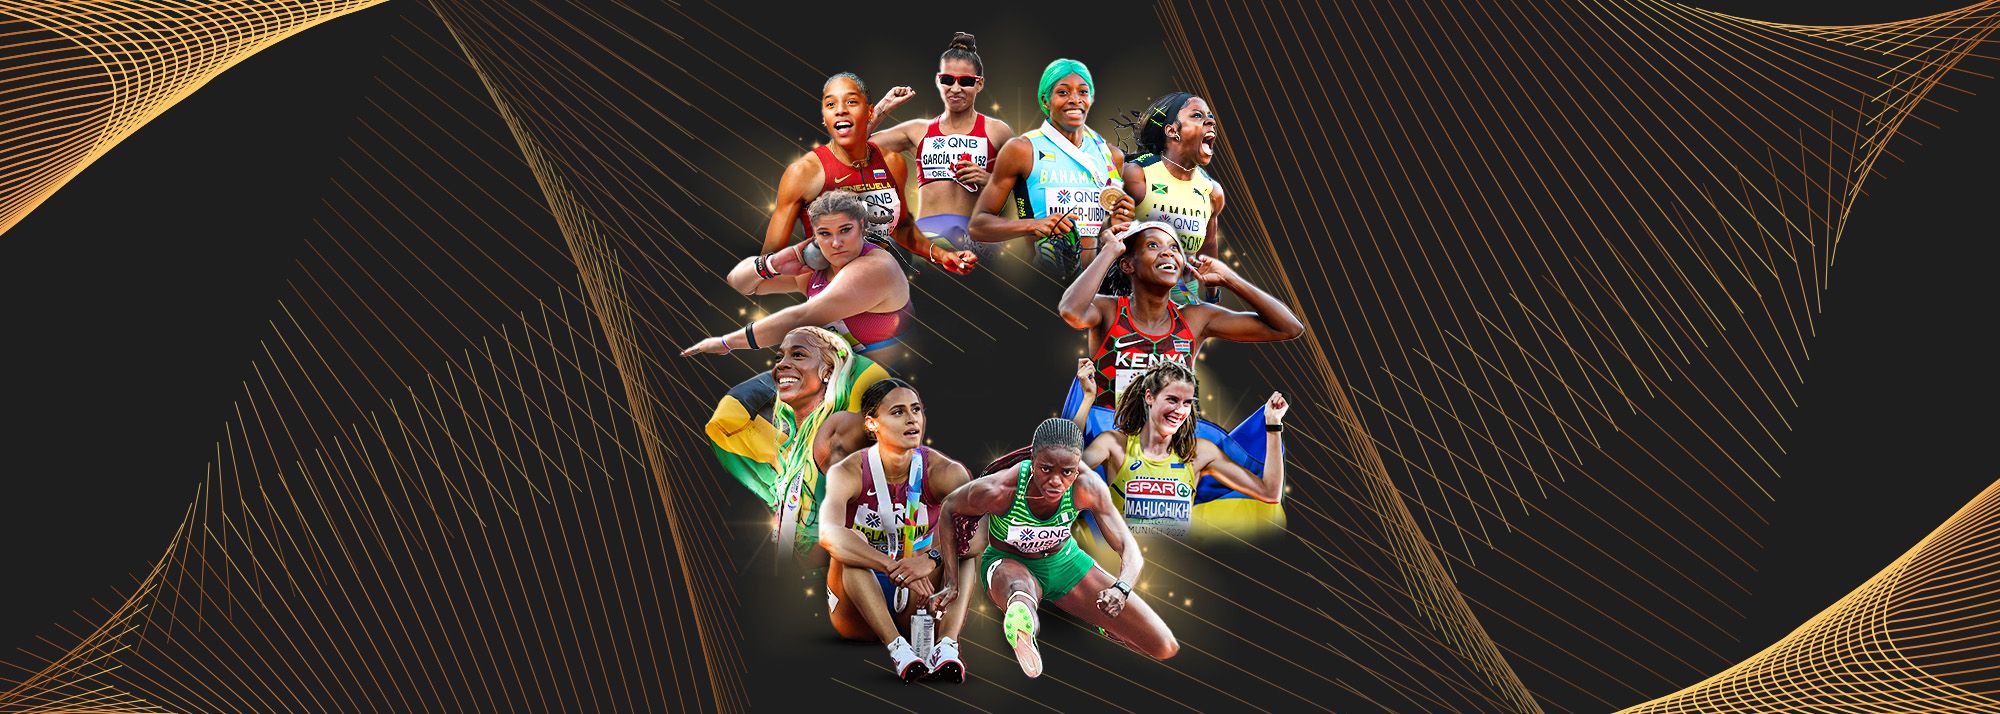 Women's World Athlete of the Year nominees 